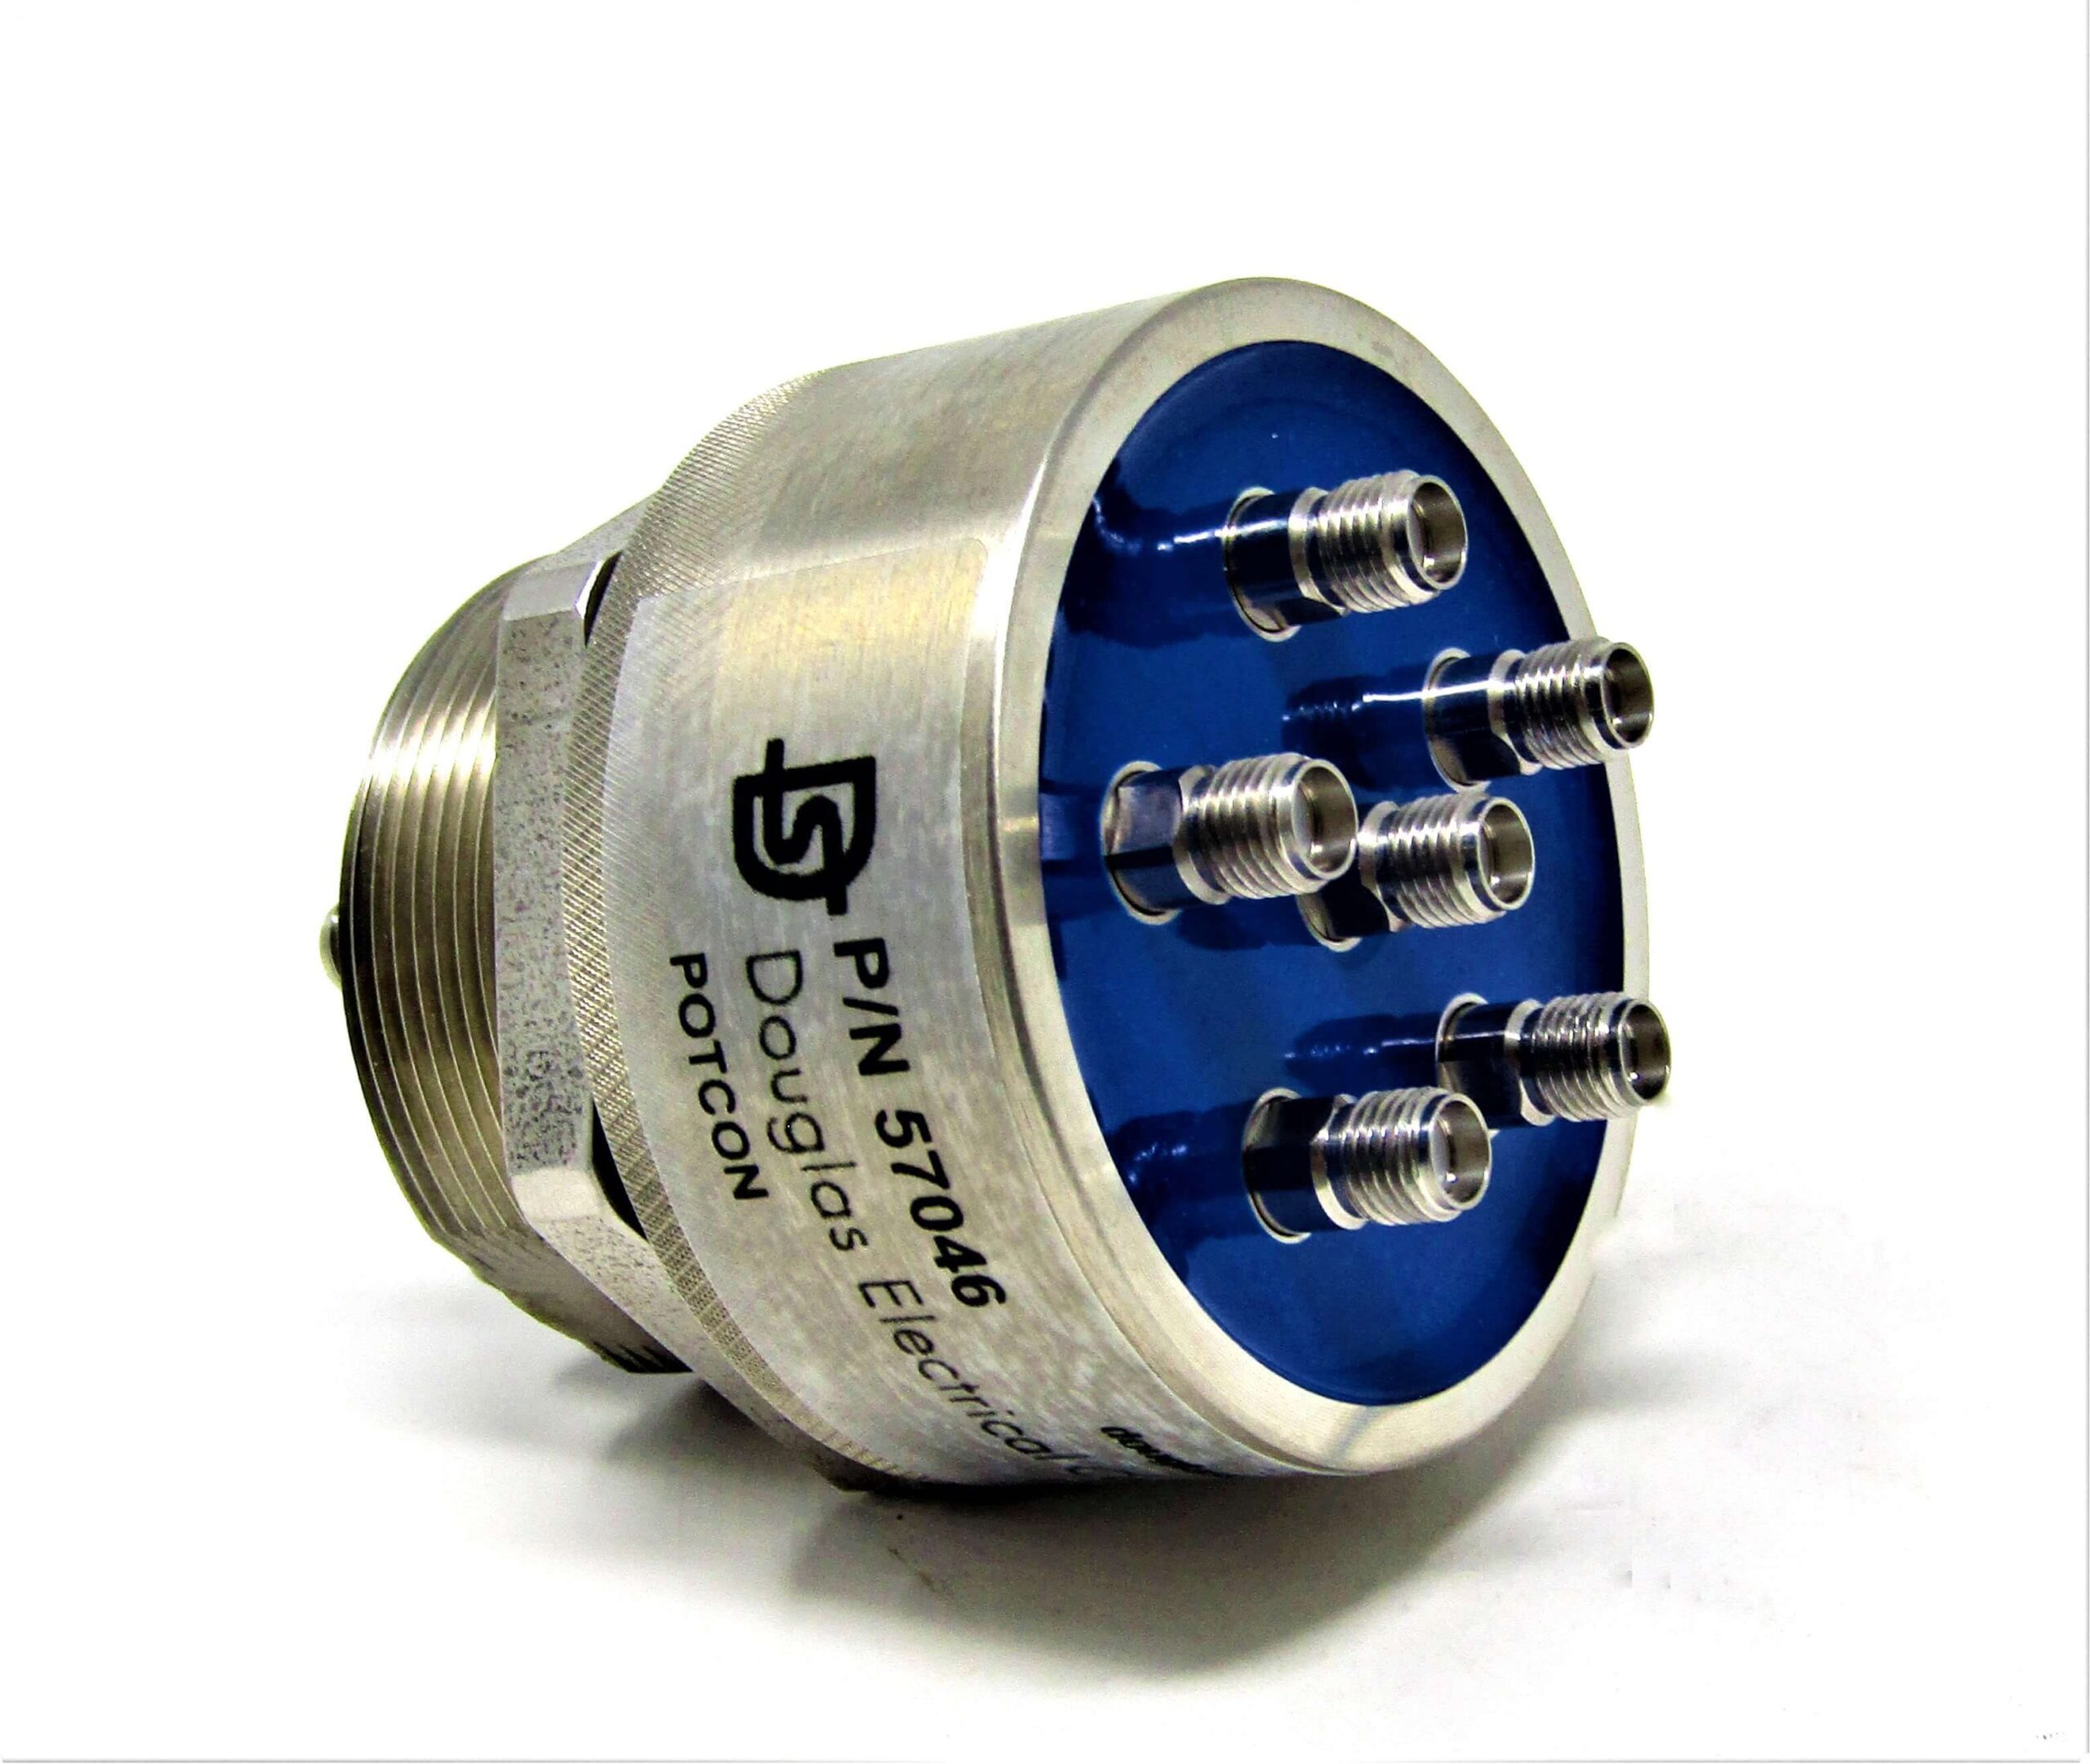 Ideal Vacuum  Ideal Vacuum Ethernet Feedthrough in an Stainless Steel  Housing with 1-14 UN x .95 Thread and Viton O-Ring